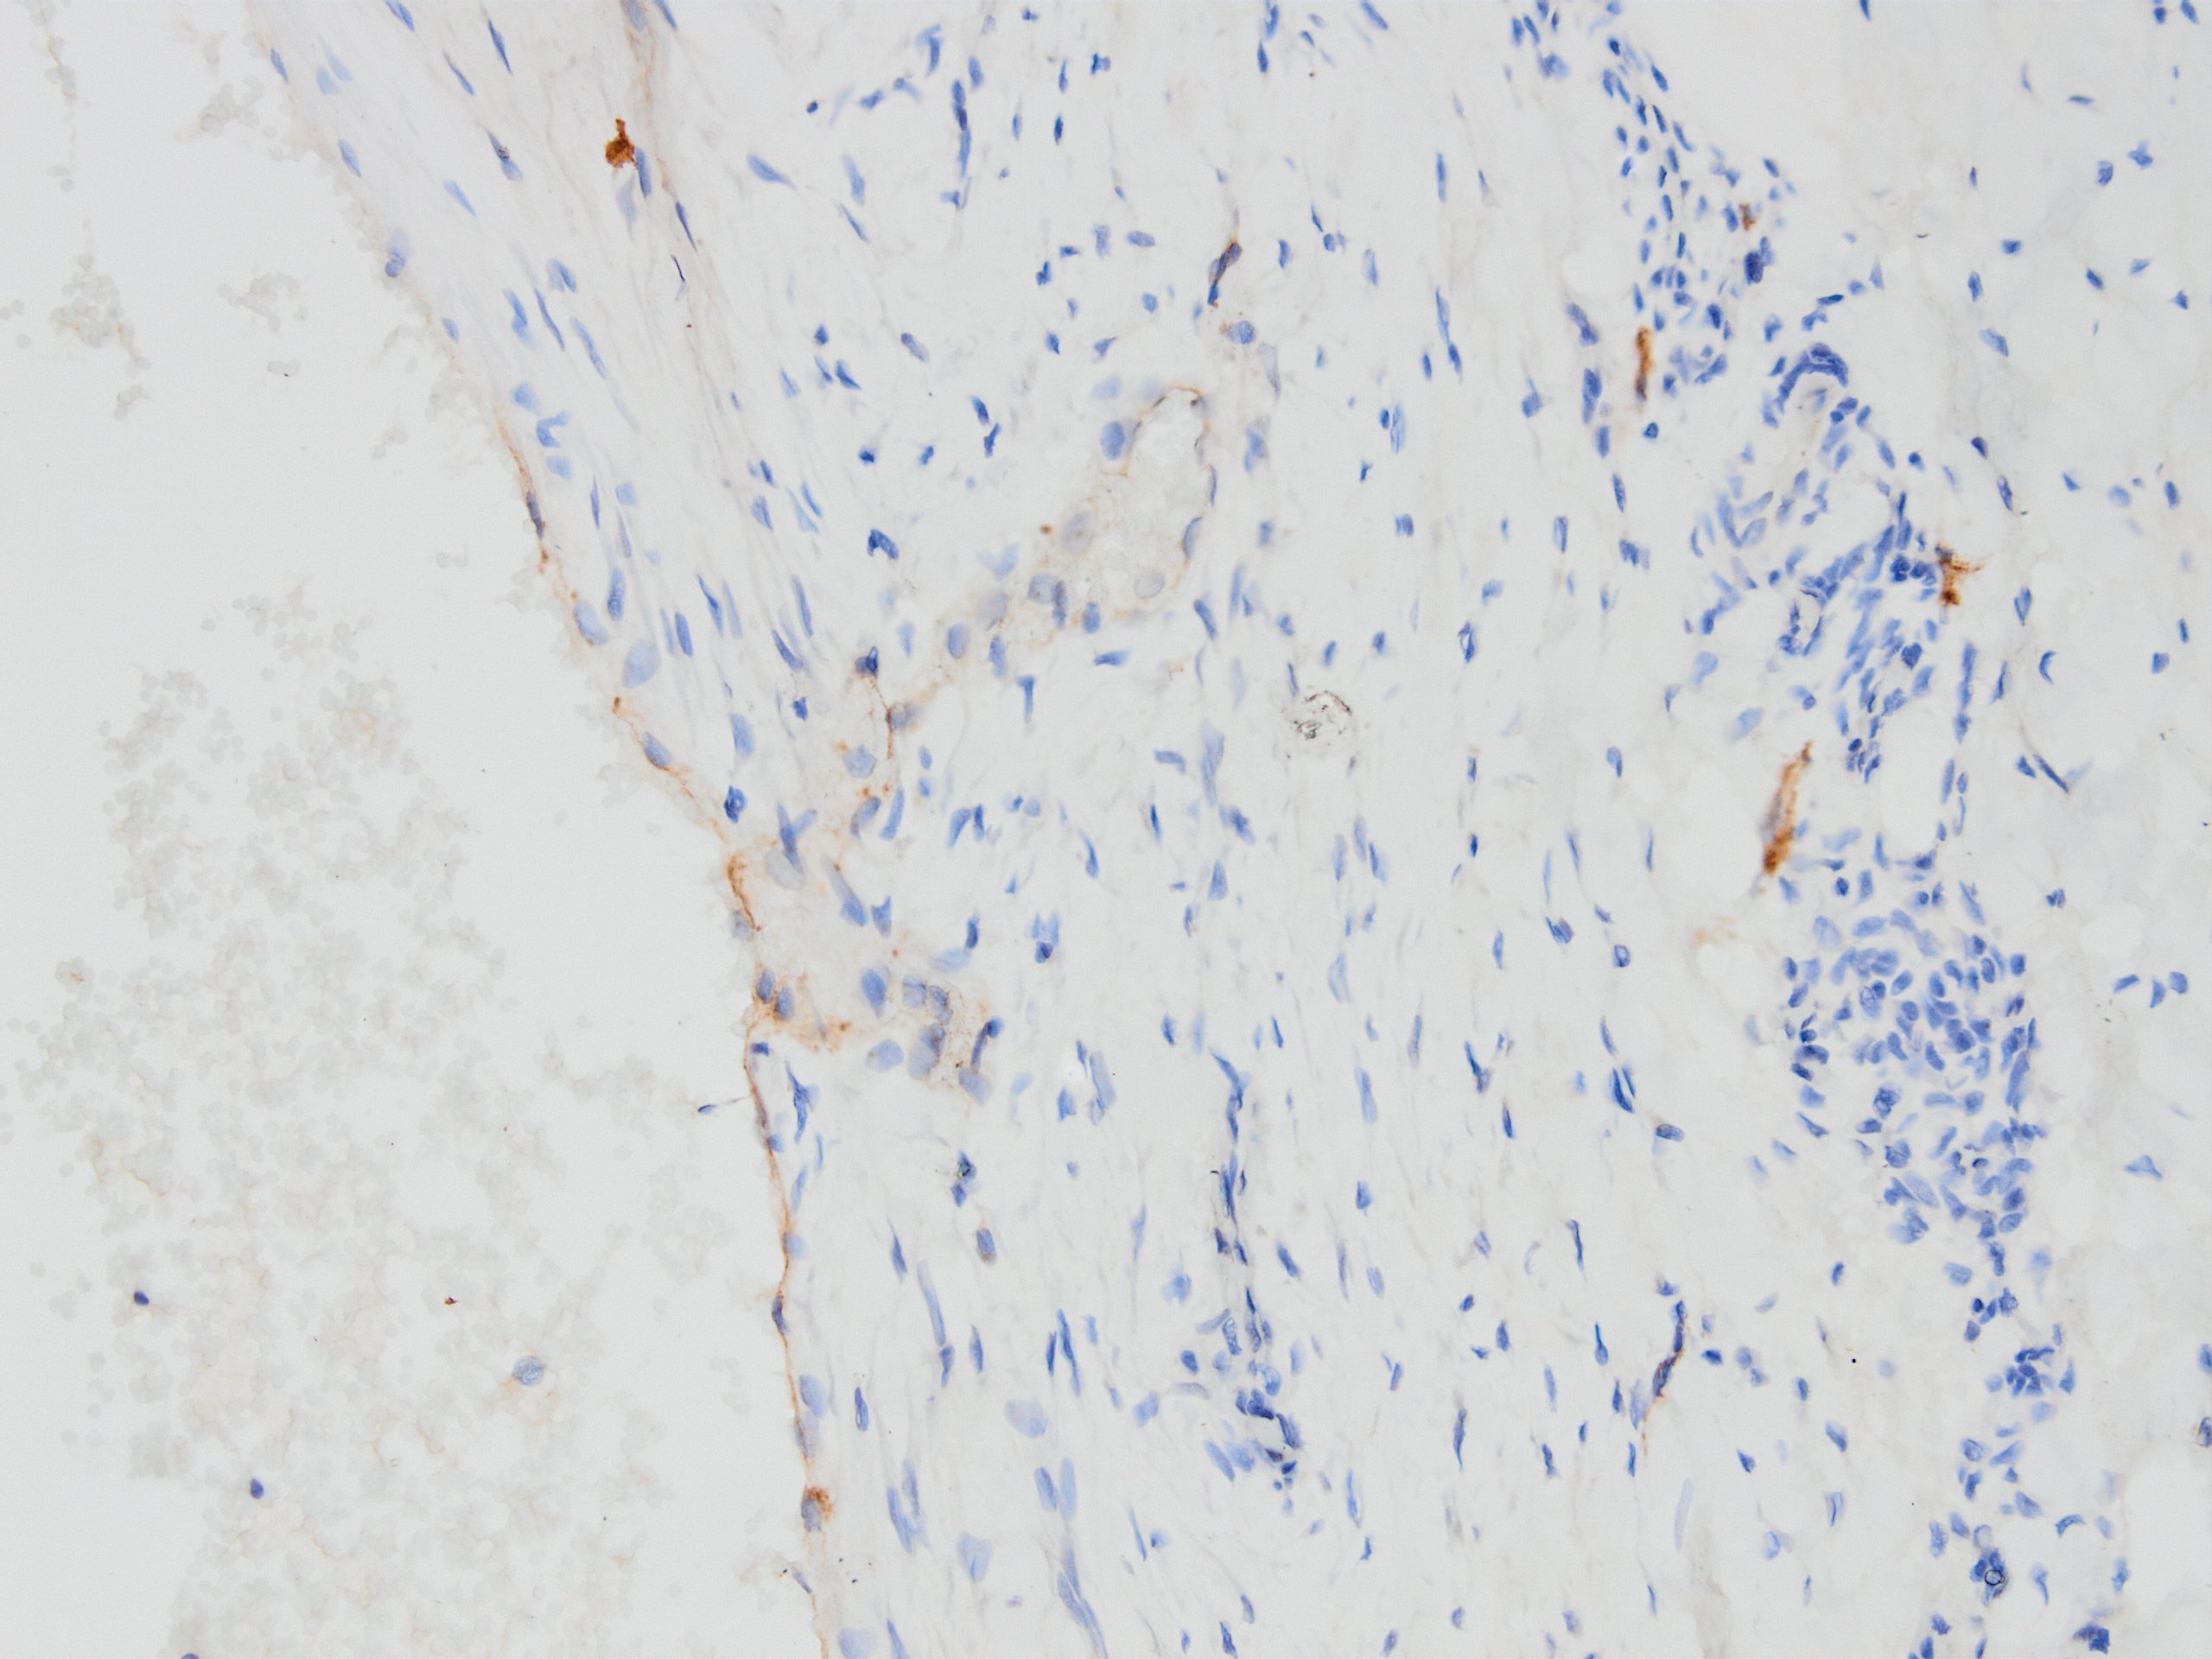 D2-40 expression proves lymphatic malformation